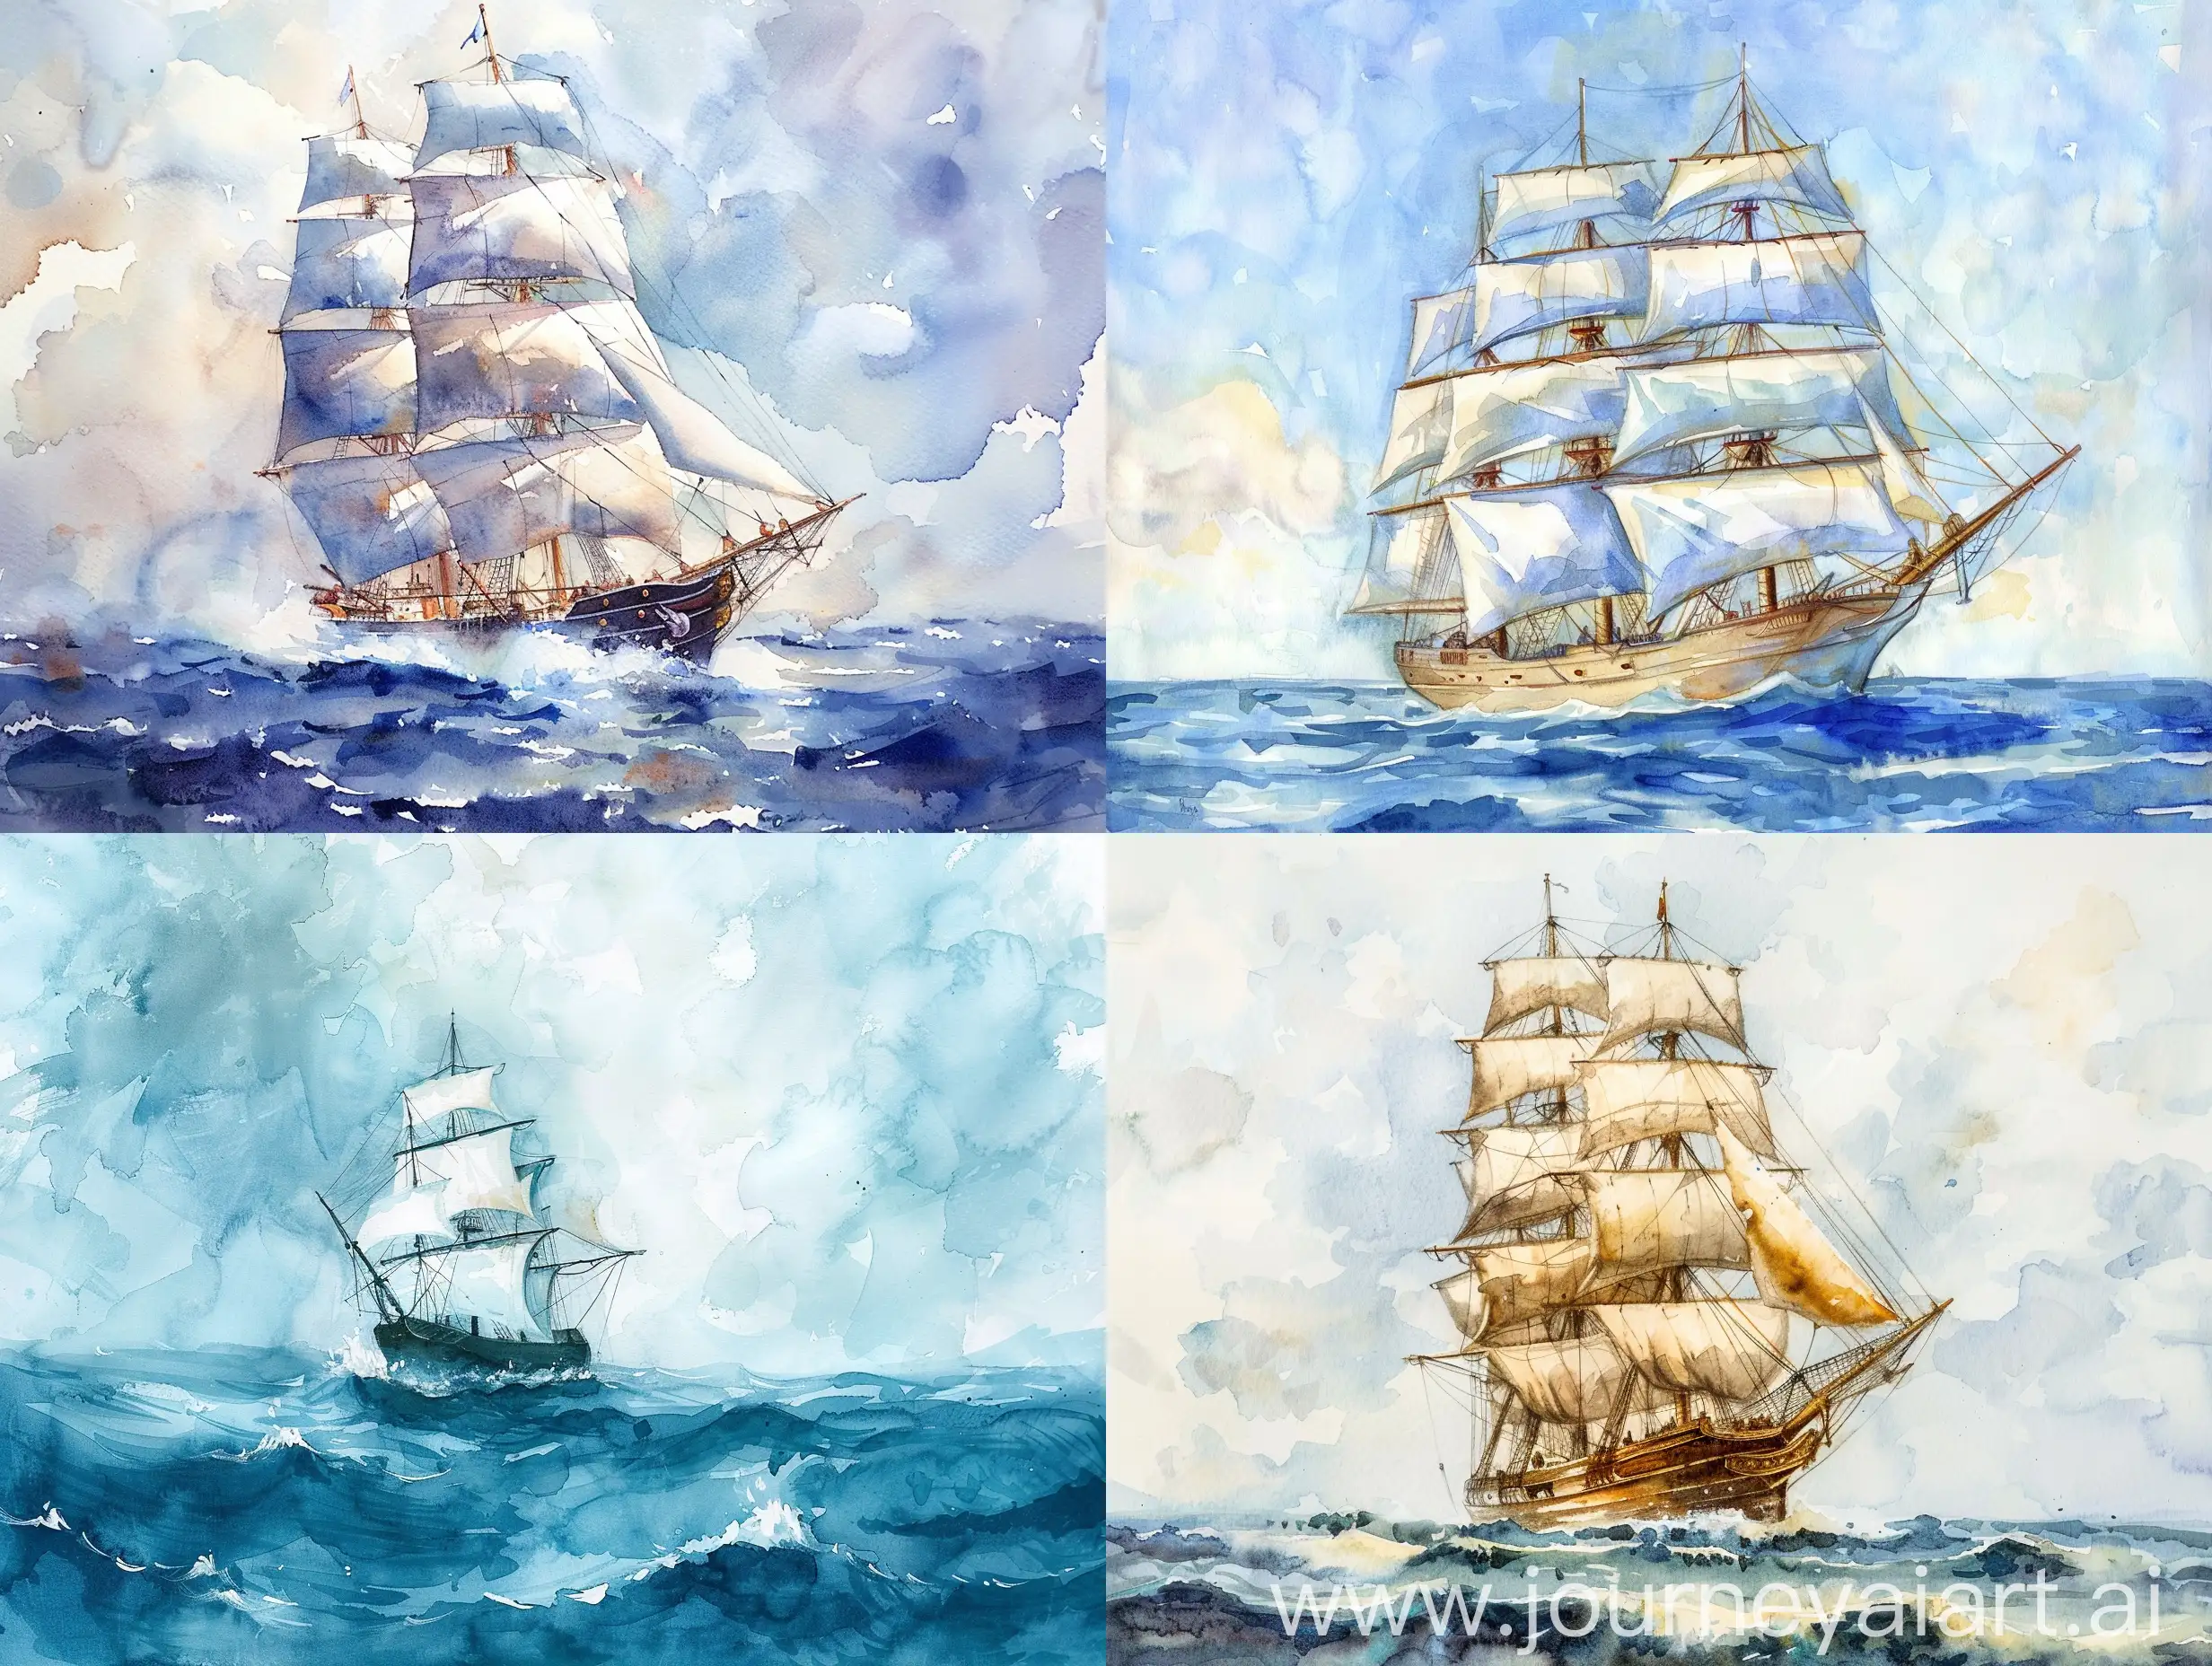 Serene-Watercolor-Painting-of-a-Sailor-Ship-Sailing-Across-the-Ocean